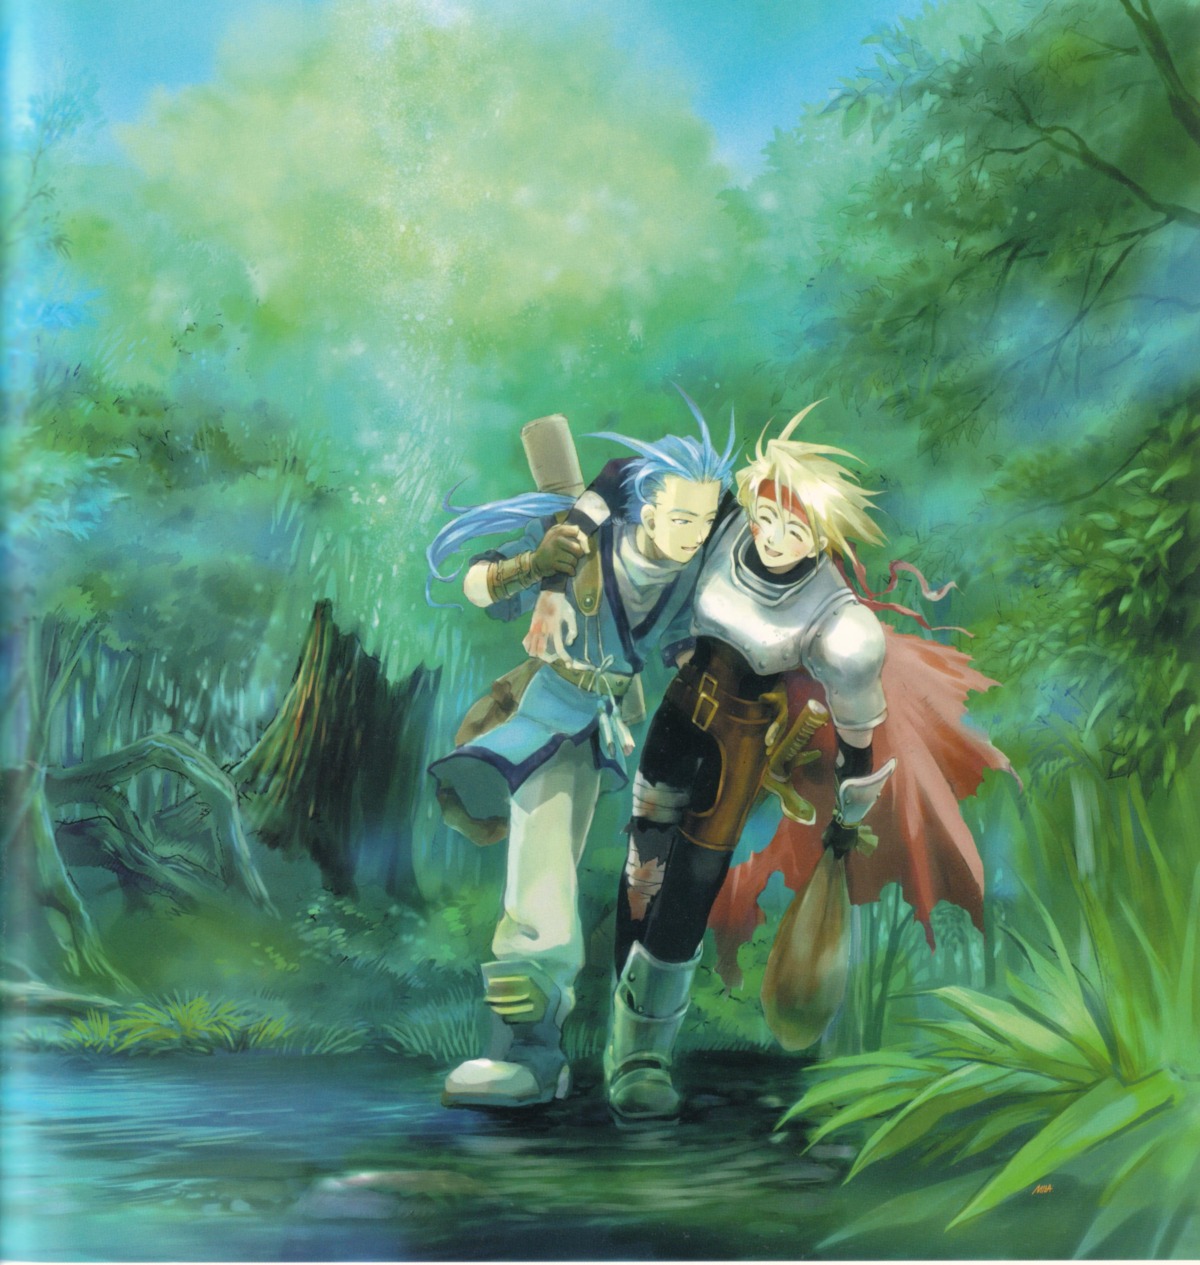 armor chester_barklight cless_alvein sword tagme tales_of tales_of_phantasia